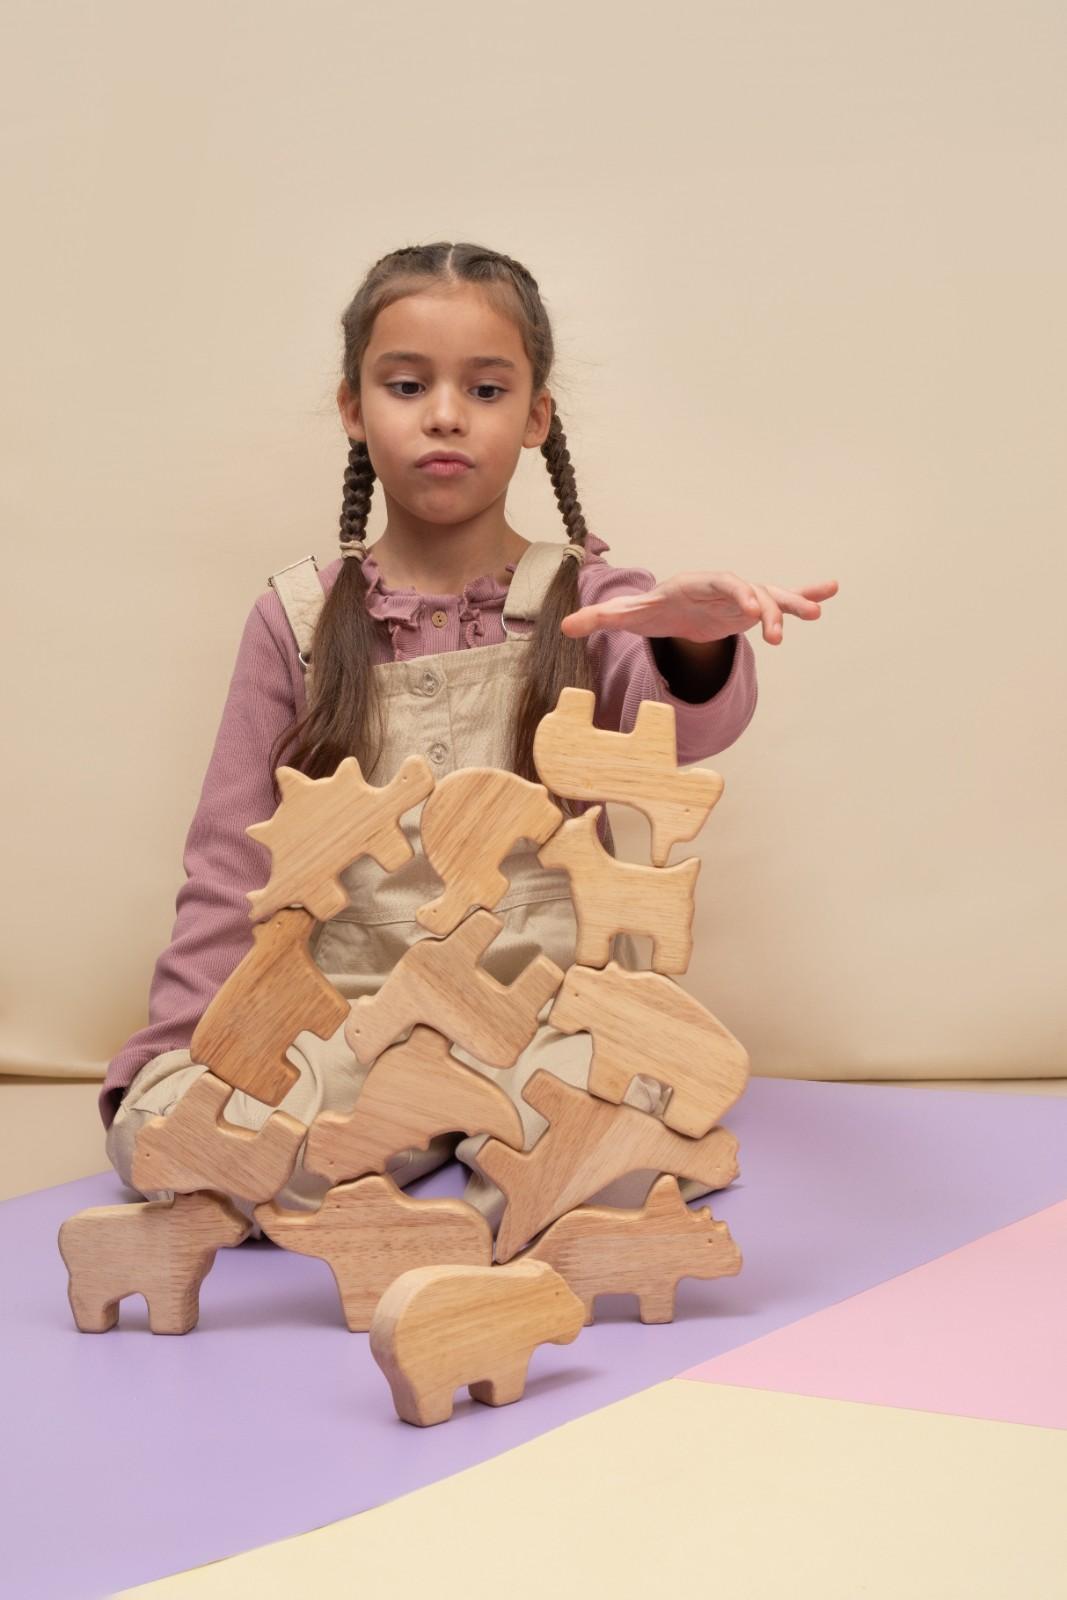 Crafting Narratives through Play: The Art of Storytelling with Wooden Toys